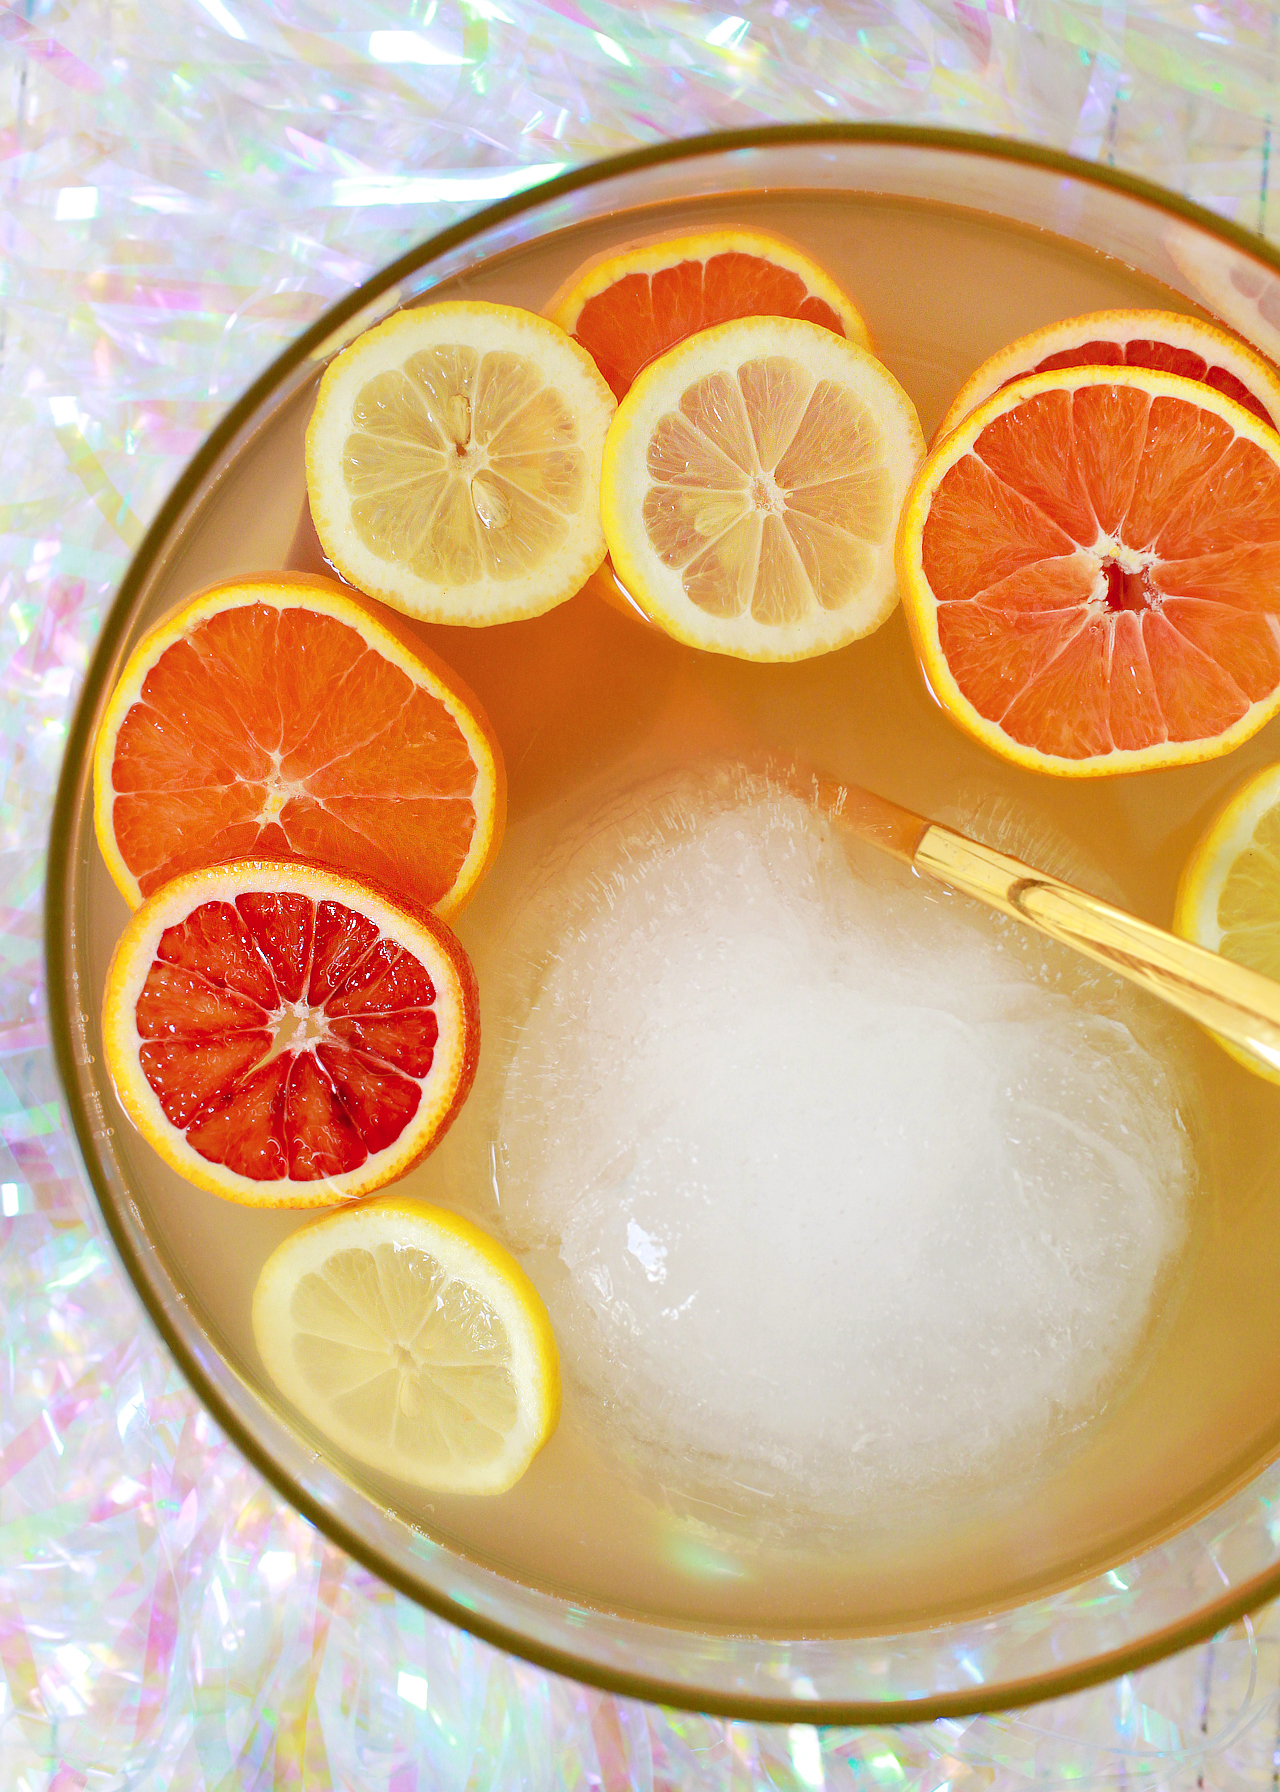 Non-alcoholic Winter Citrus Punch with Glad Kitchen Pro